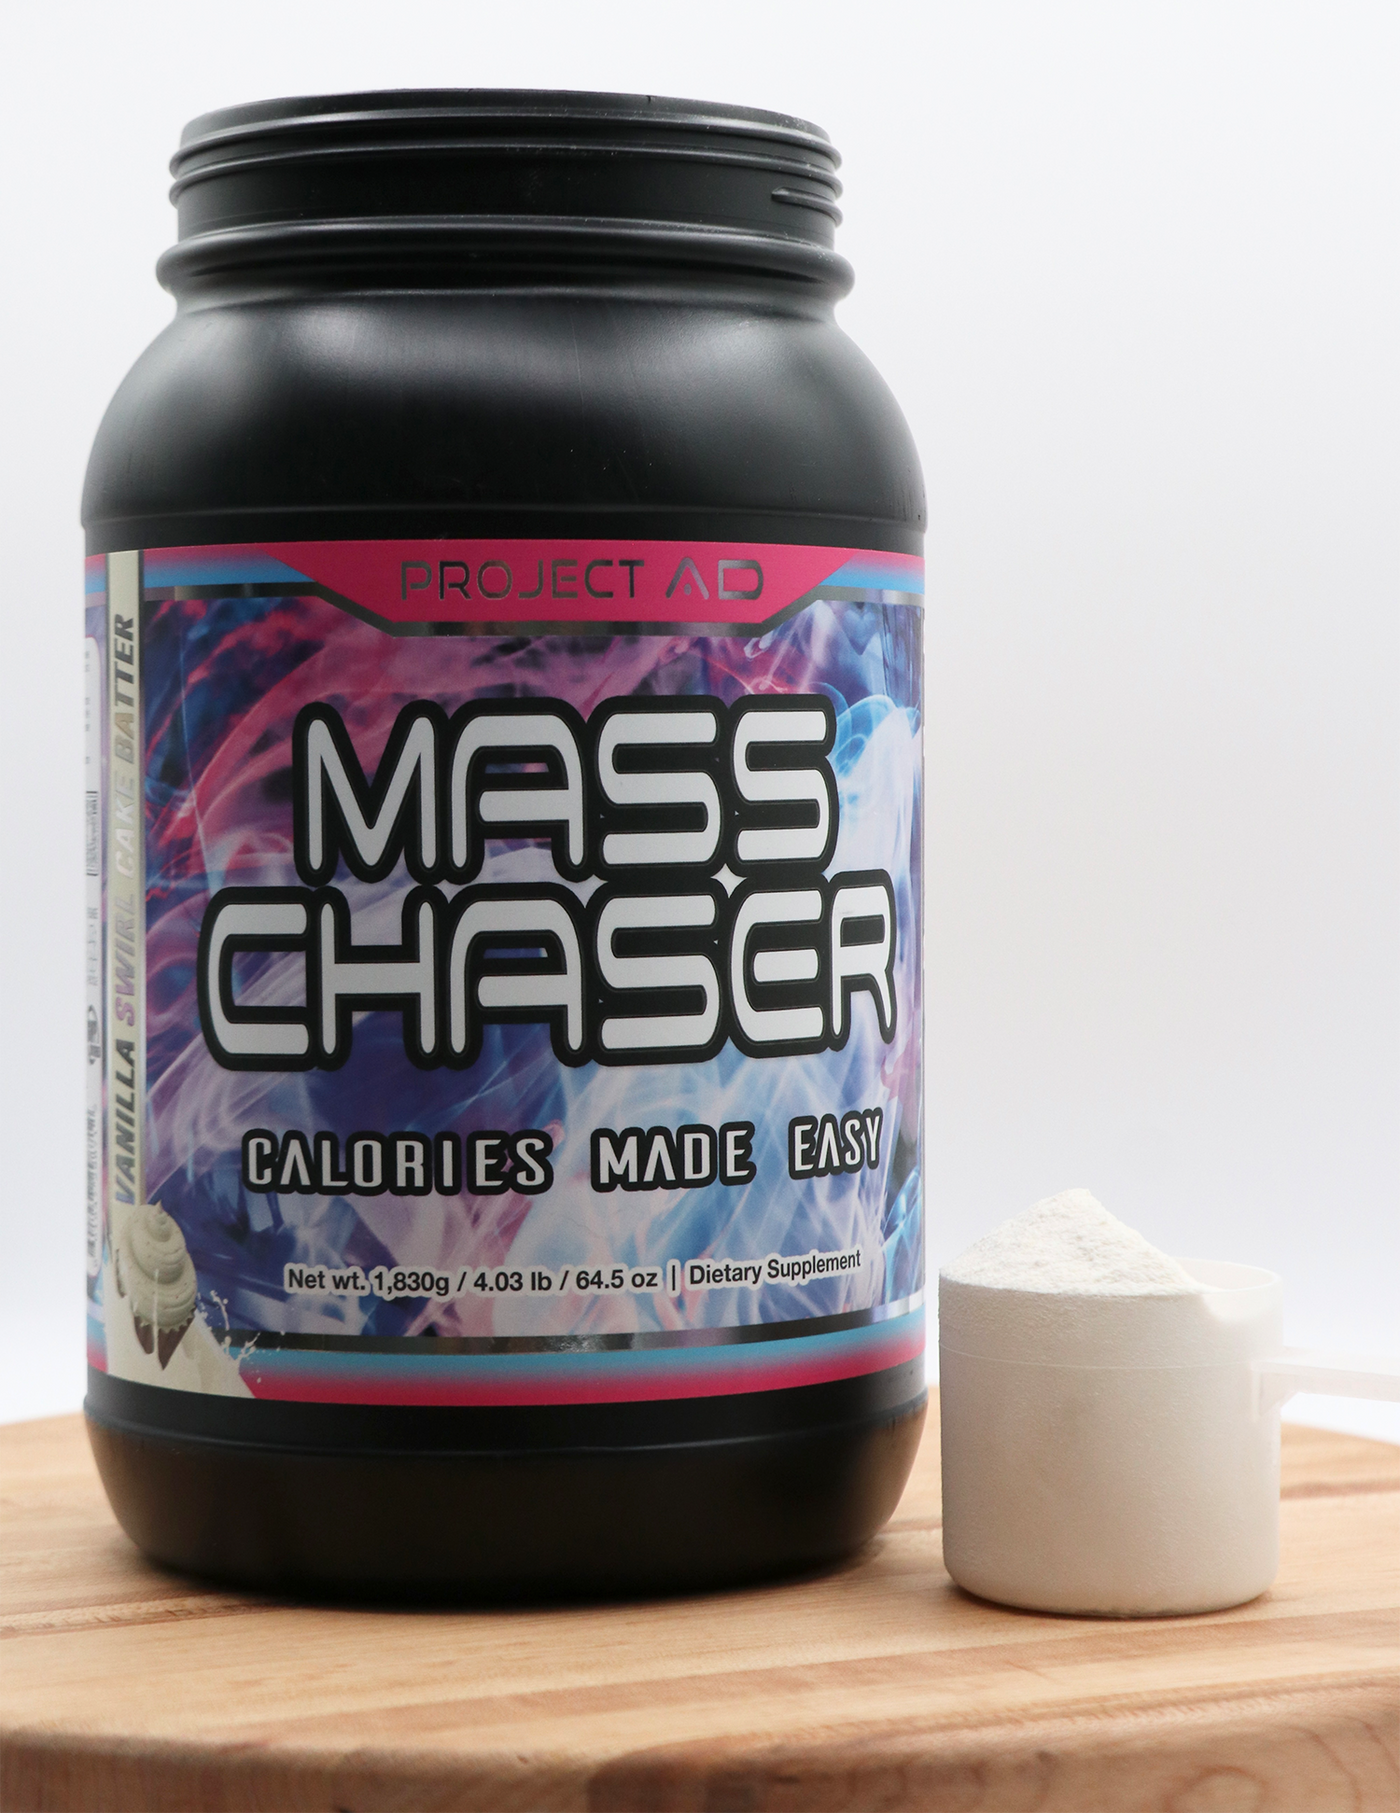 MASS CHASER – Muscle Gainer マスチェイサー（体重増量用プロテイン）